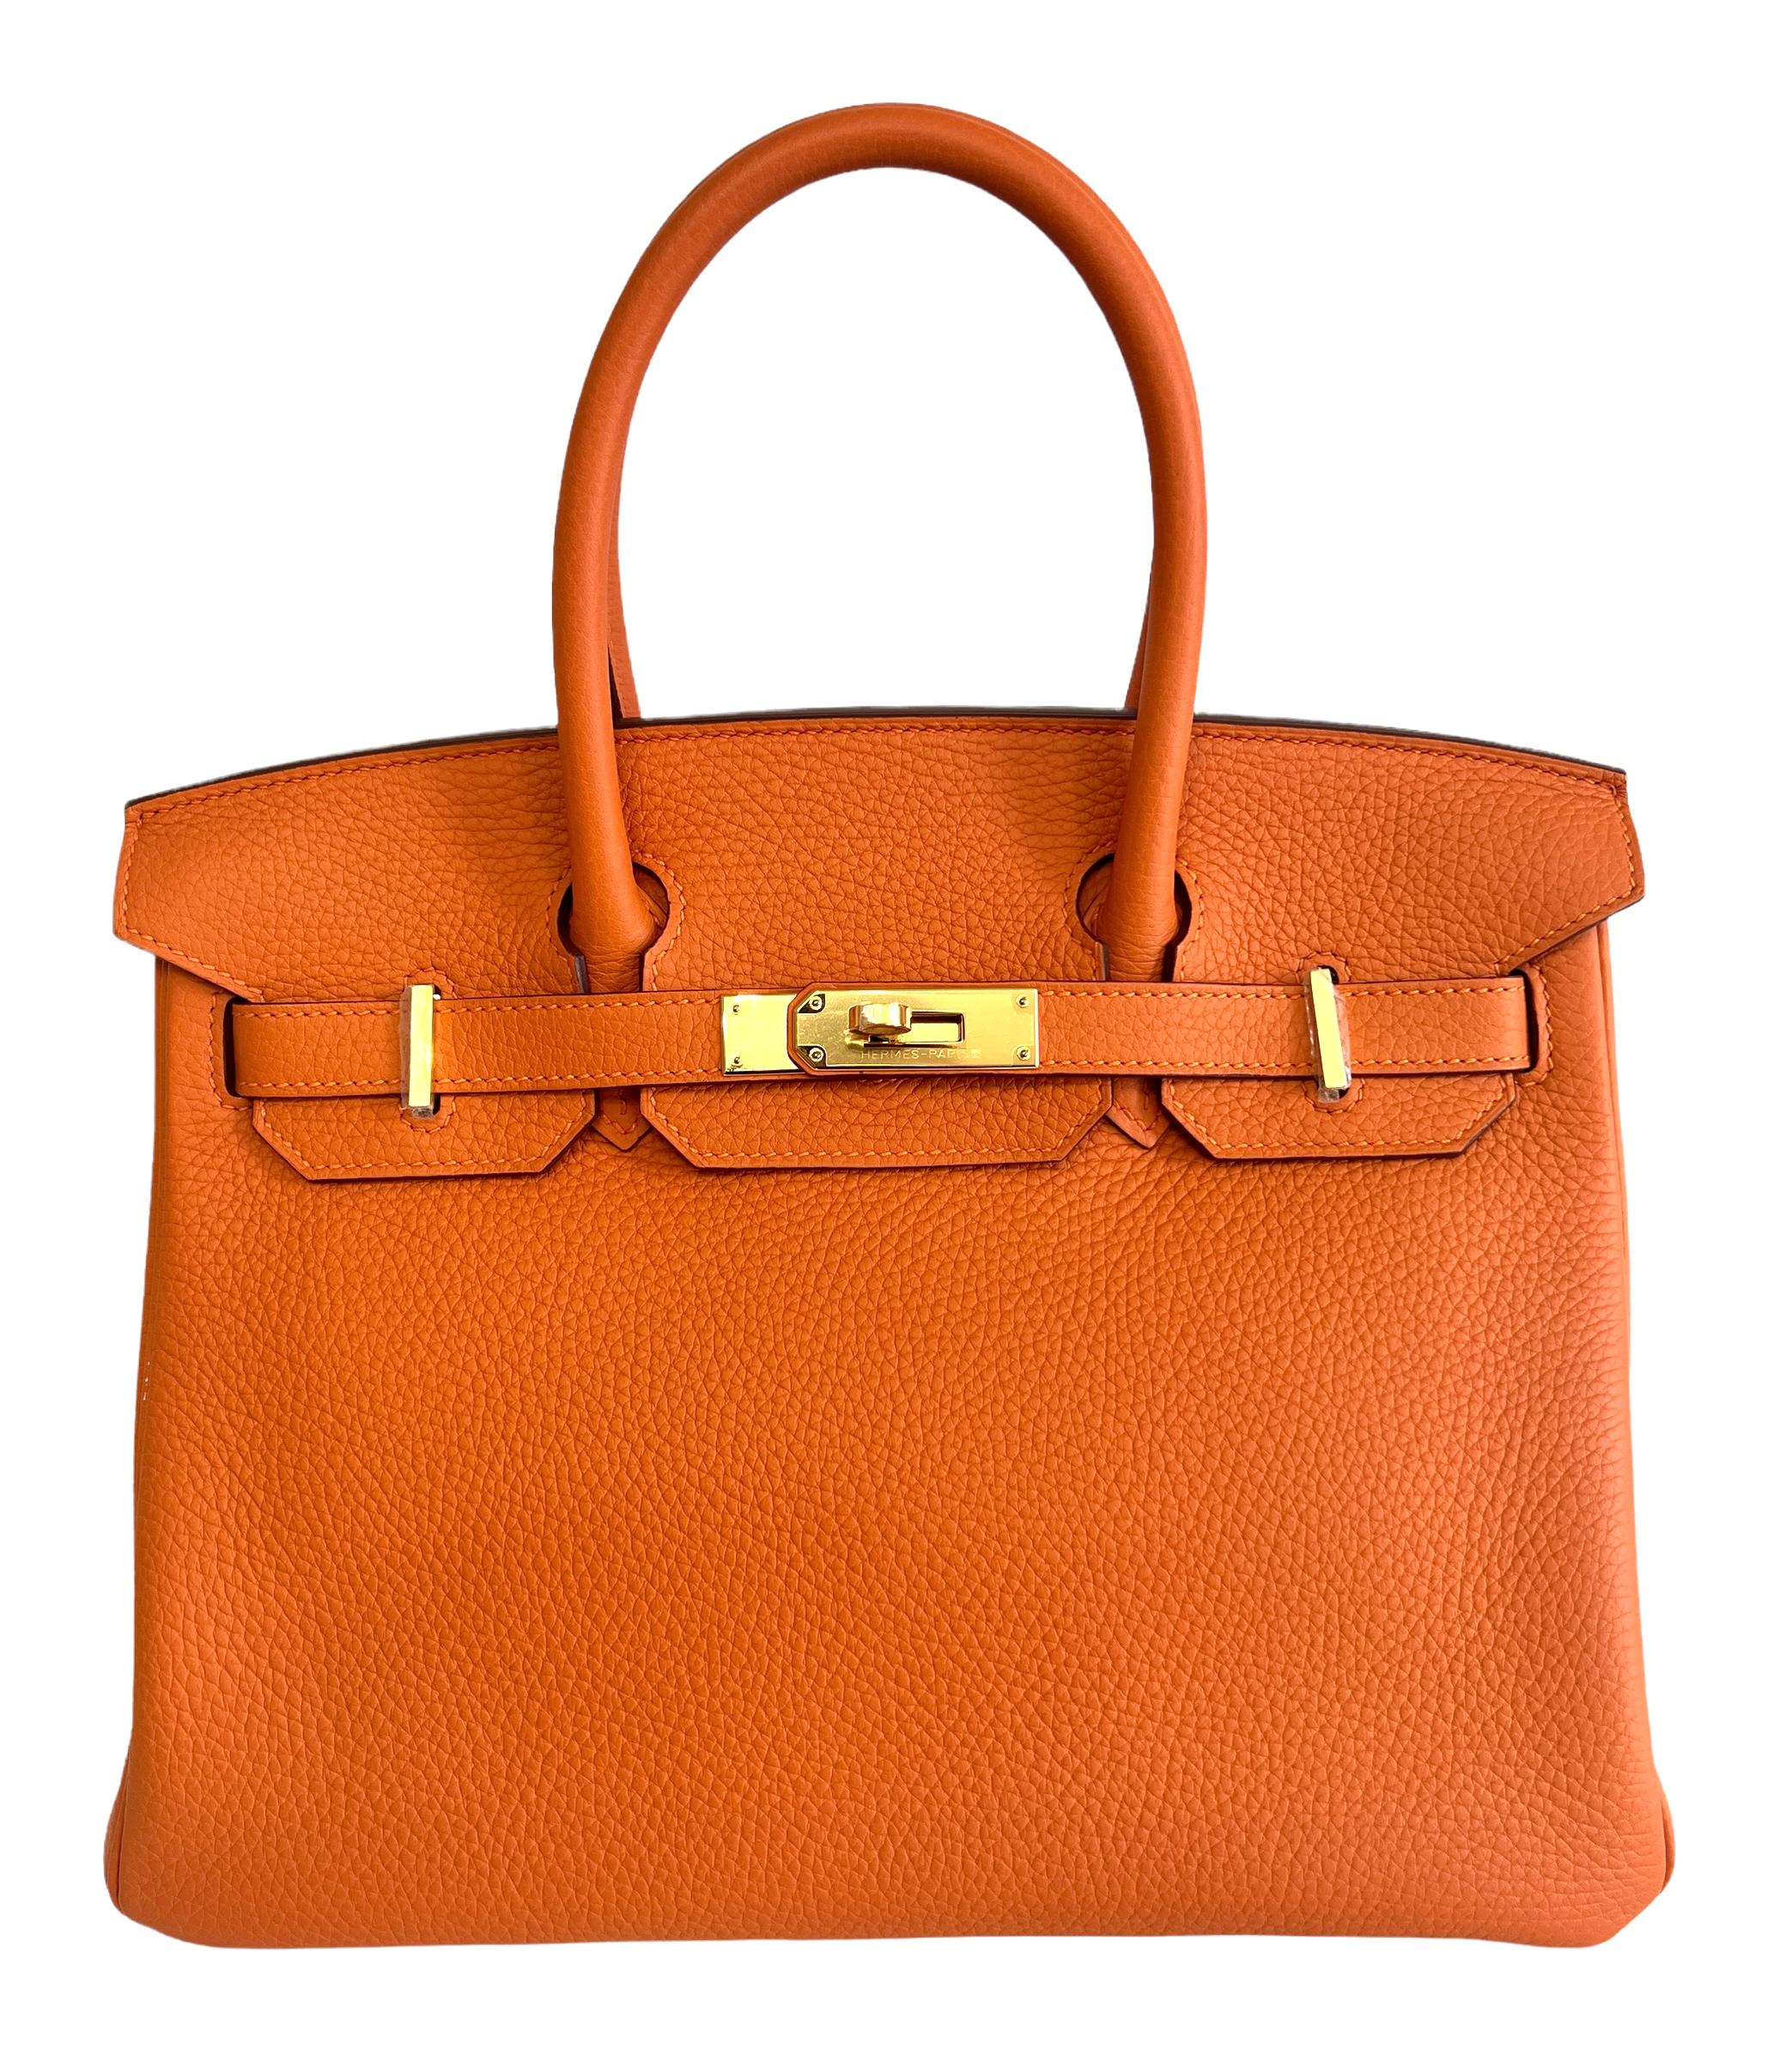 Beautiful Hermes Birkin 30 Orange Clemence Leather complimented by Gold Hardware. Pristine condition with plastic on hardware. Excellent corners and structure. 
2015 T Stamp. 

Shop with Confidence from Lux Addicts. Authenticity Guaranteed! 